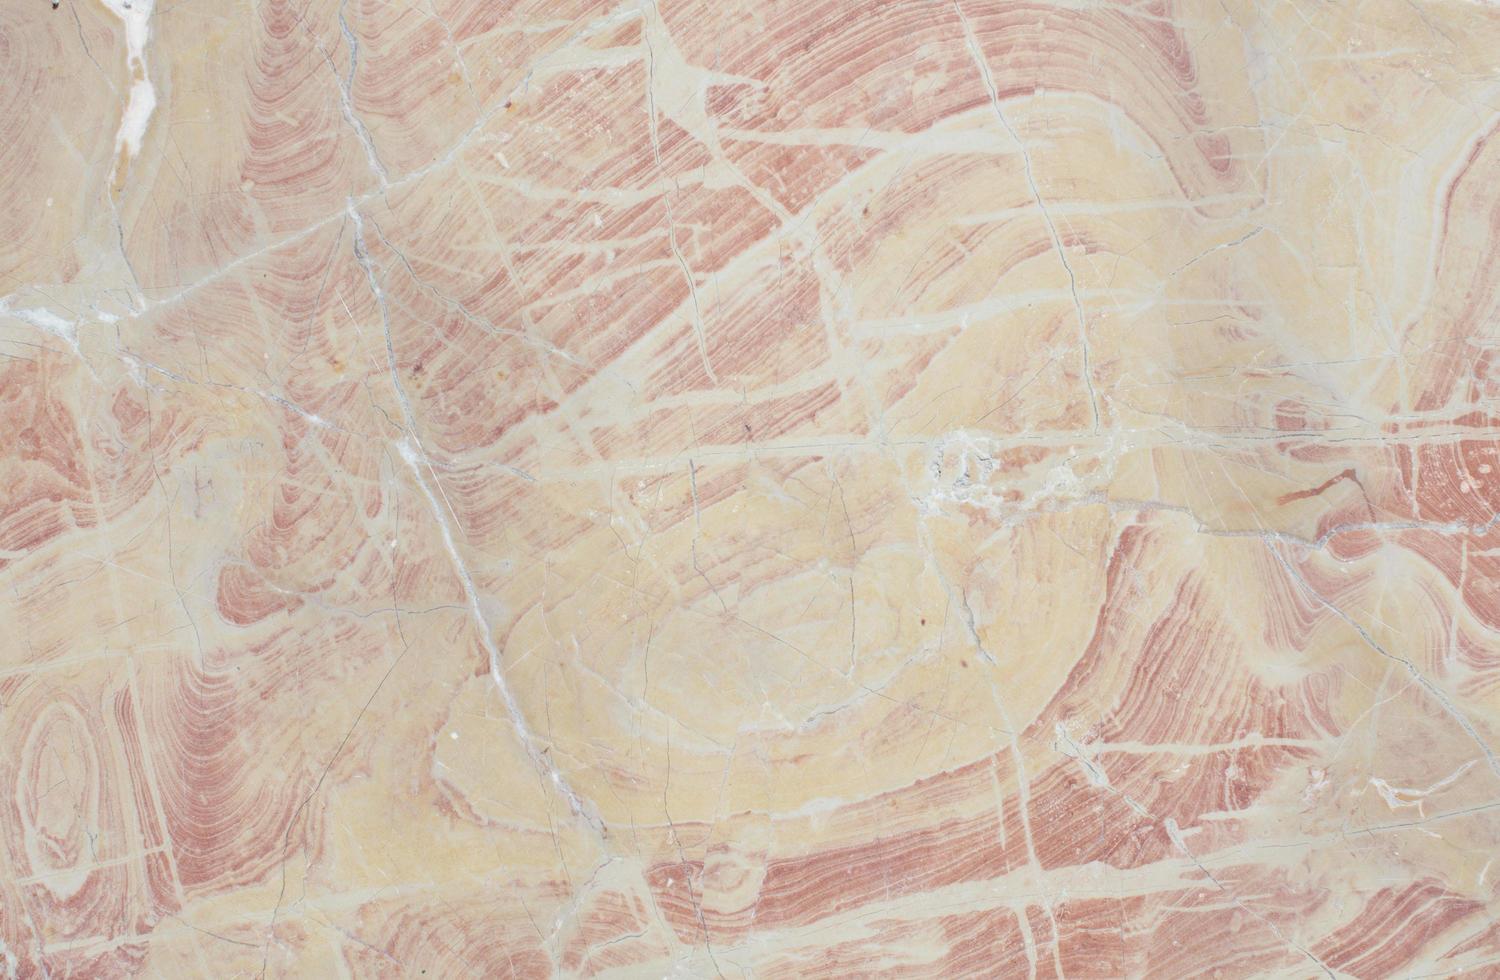 Marbled stone texture background photo